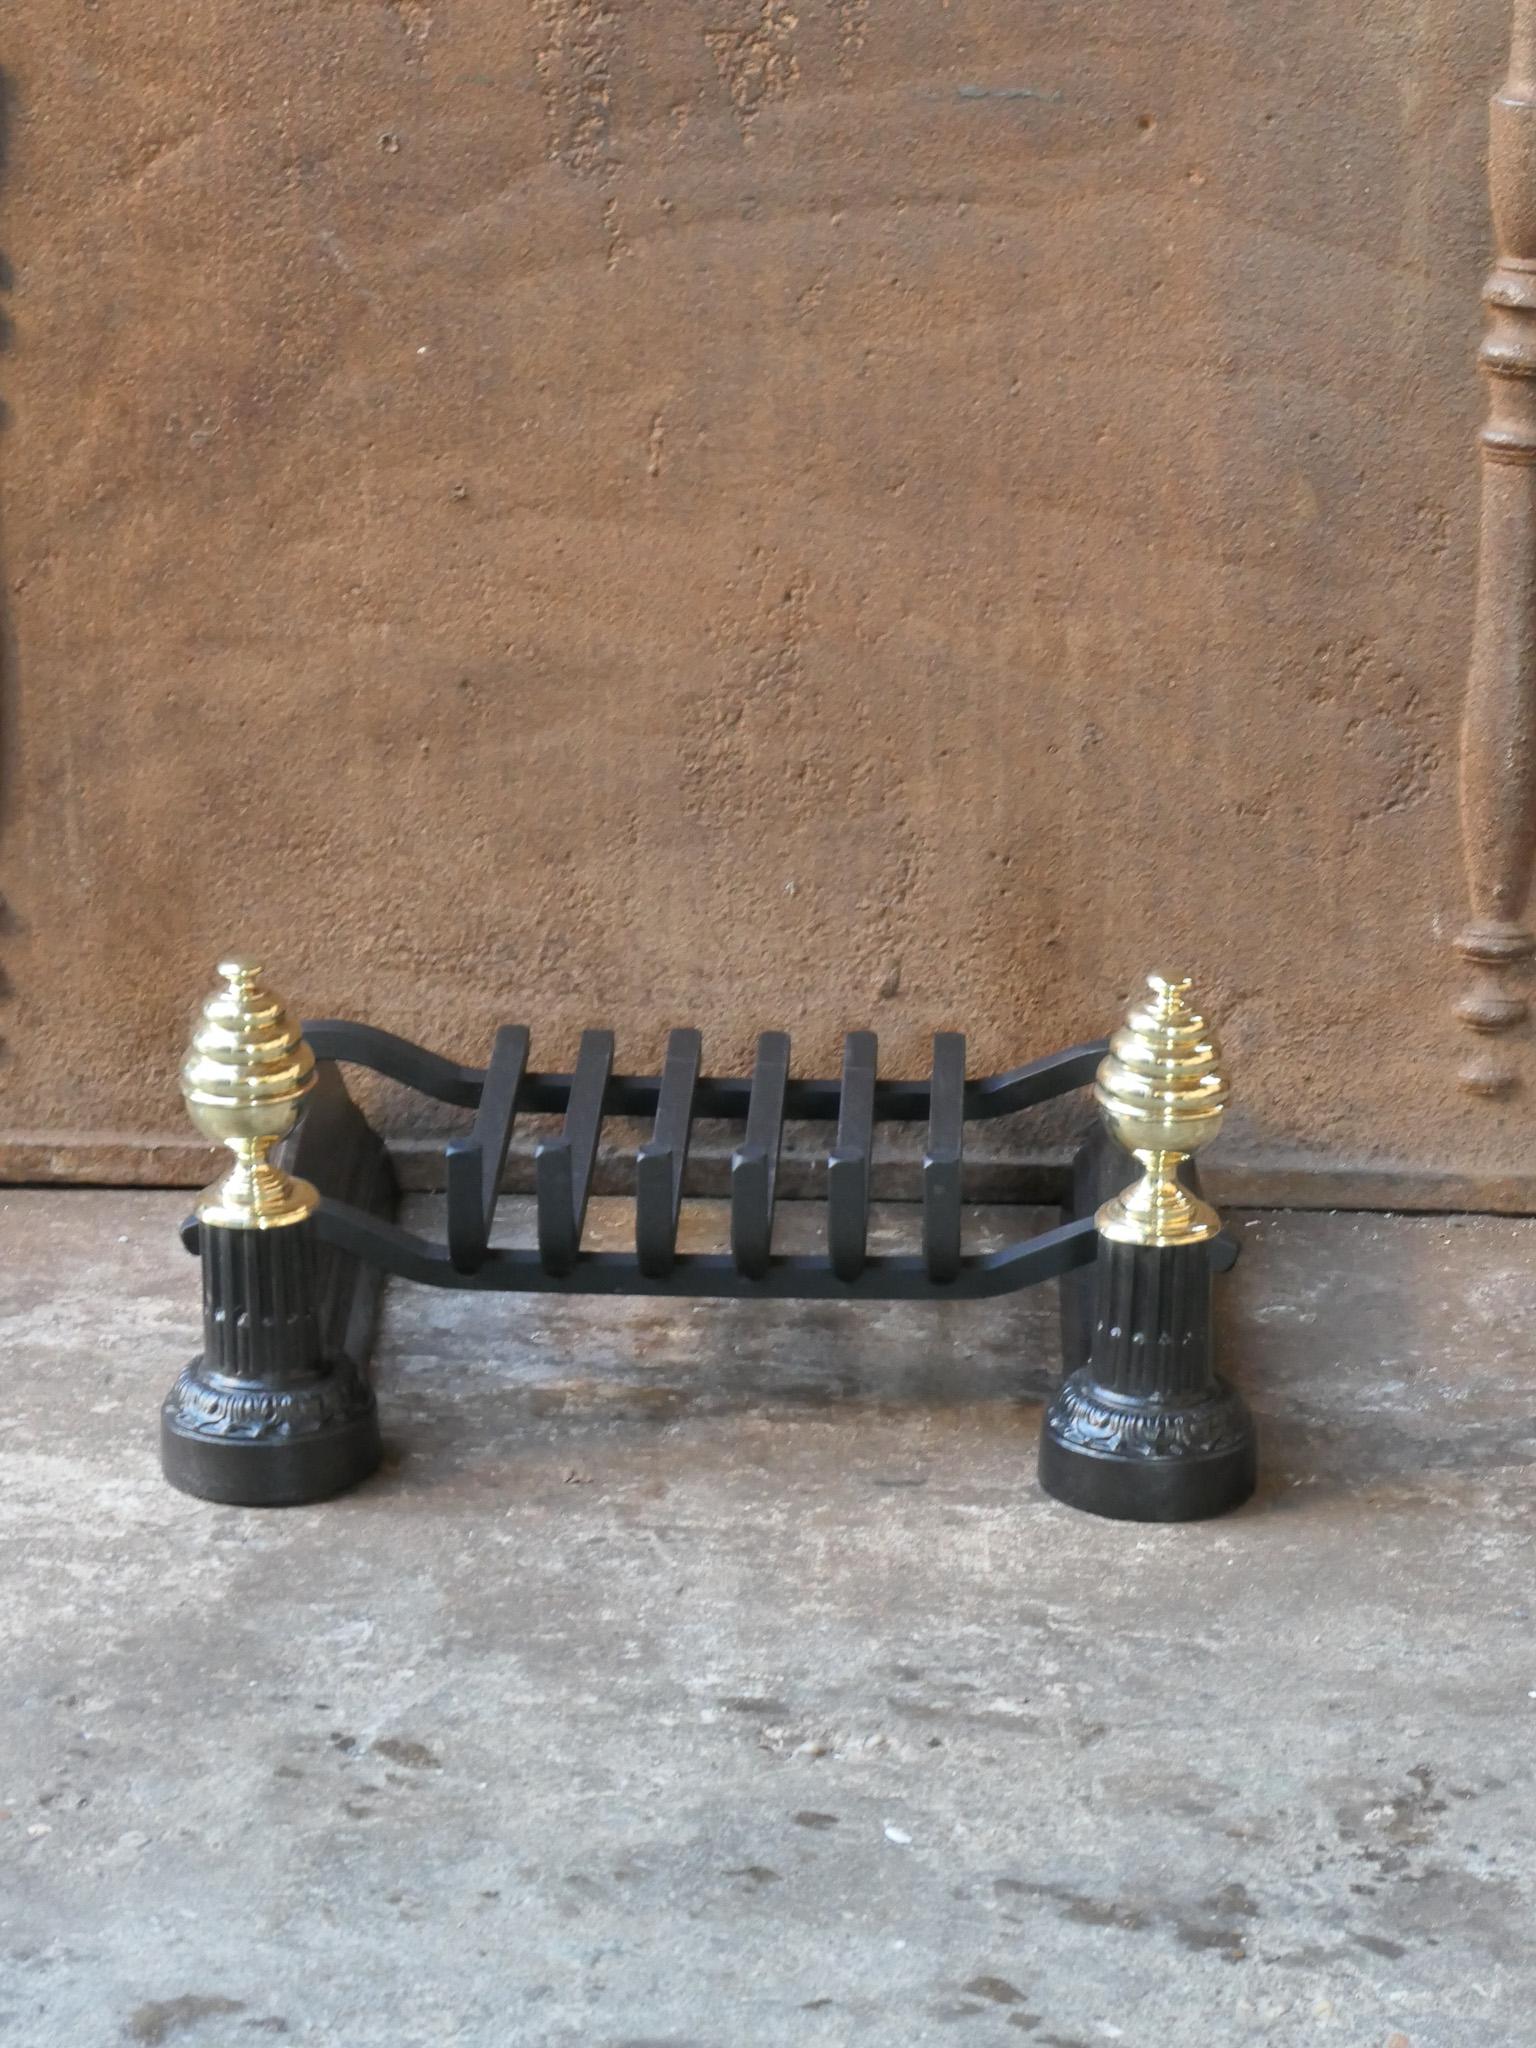 19th century French Napoleon III andirons made of cast iron and polished brass with a recently forged grate. The basket is in a good condition and is fully functional.